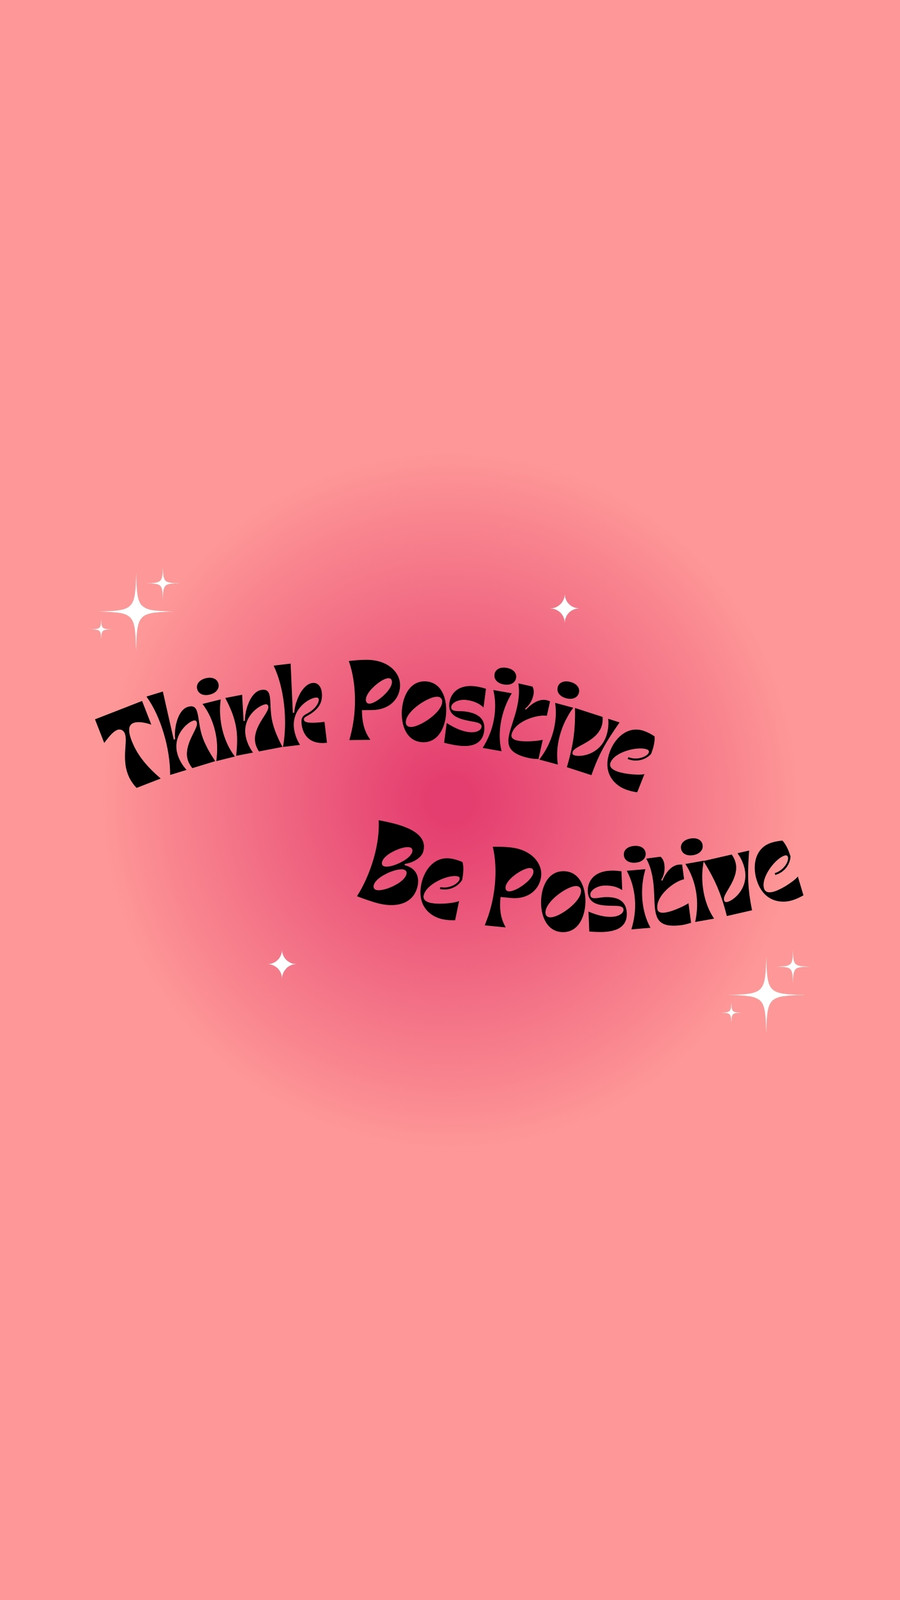 Think positive. | CanStock